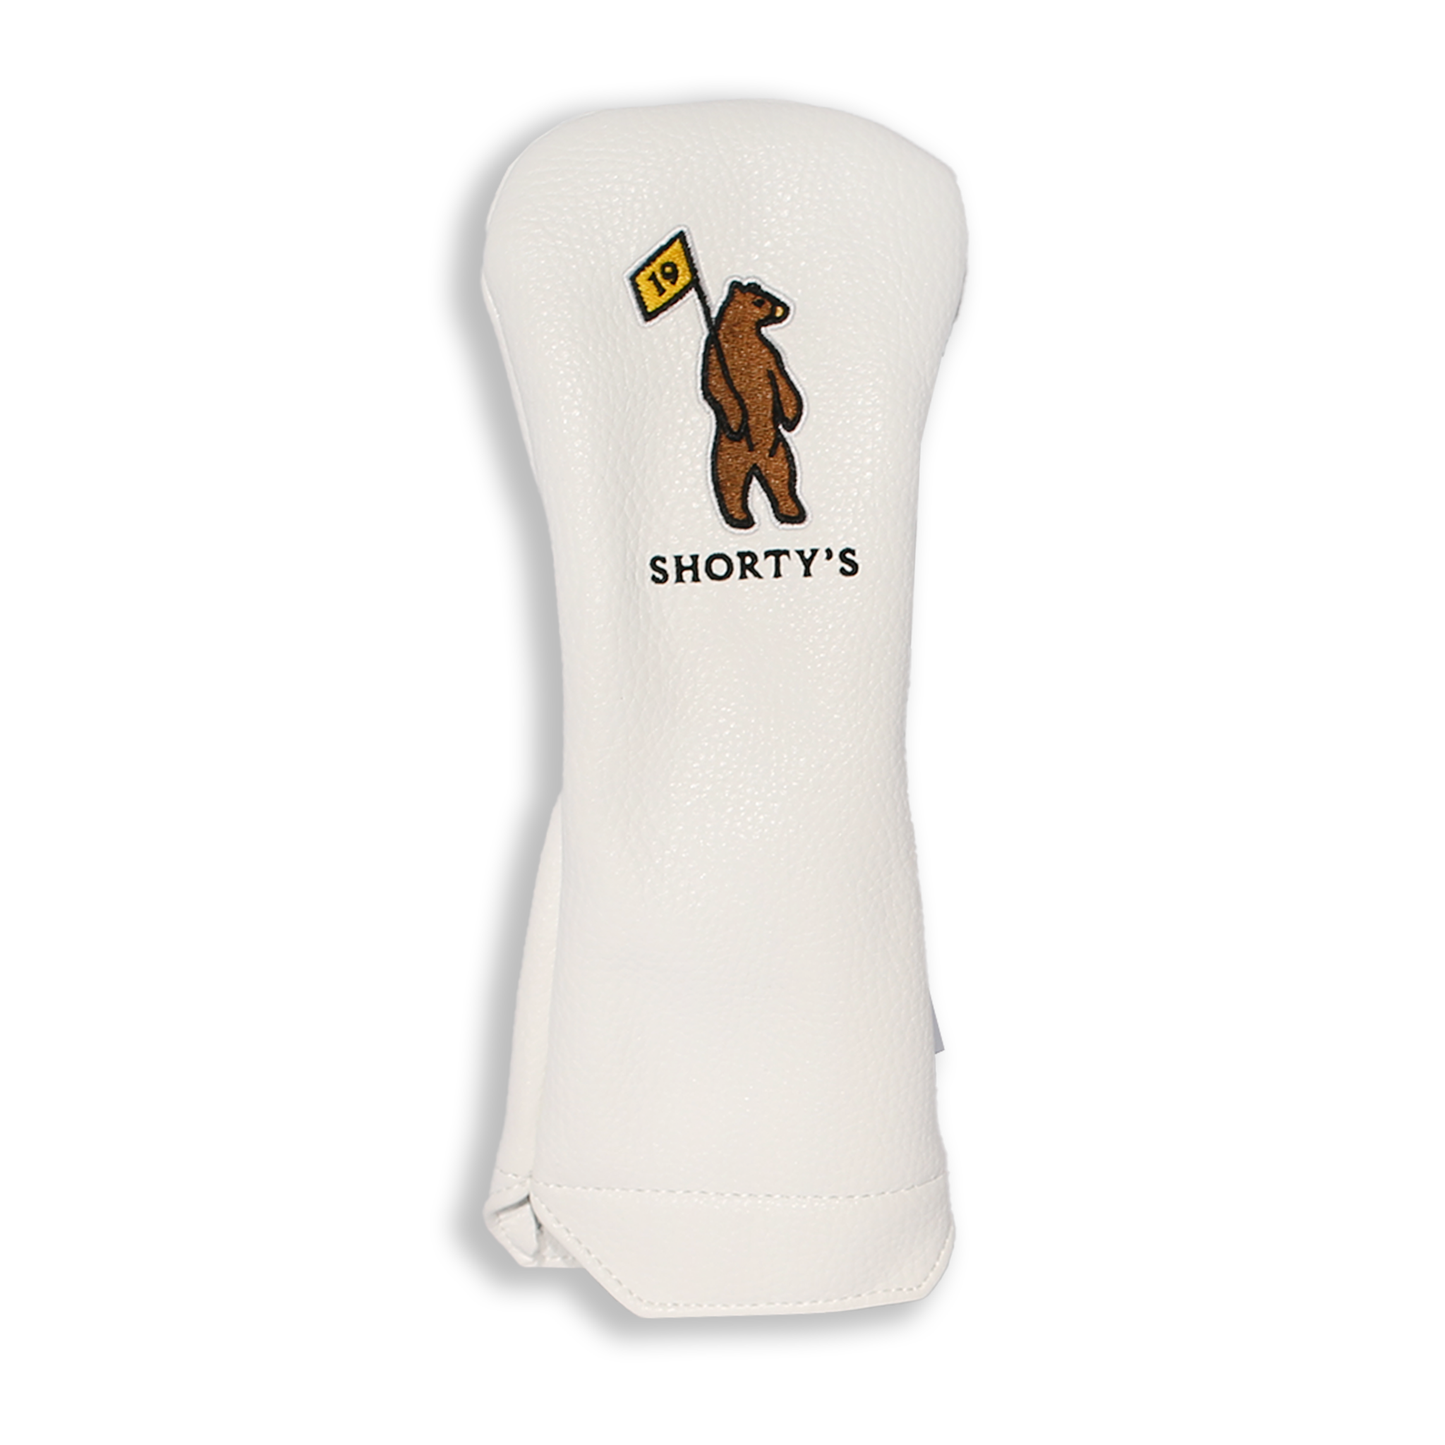 PRG Shoty's Headcover - White